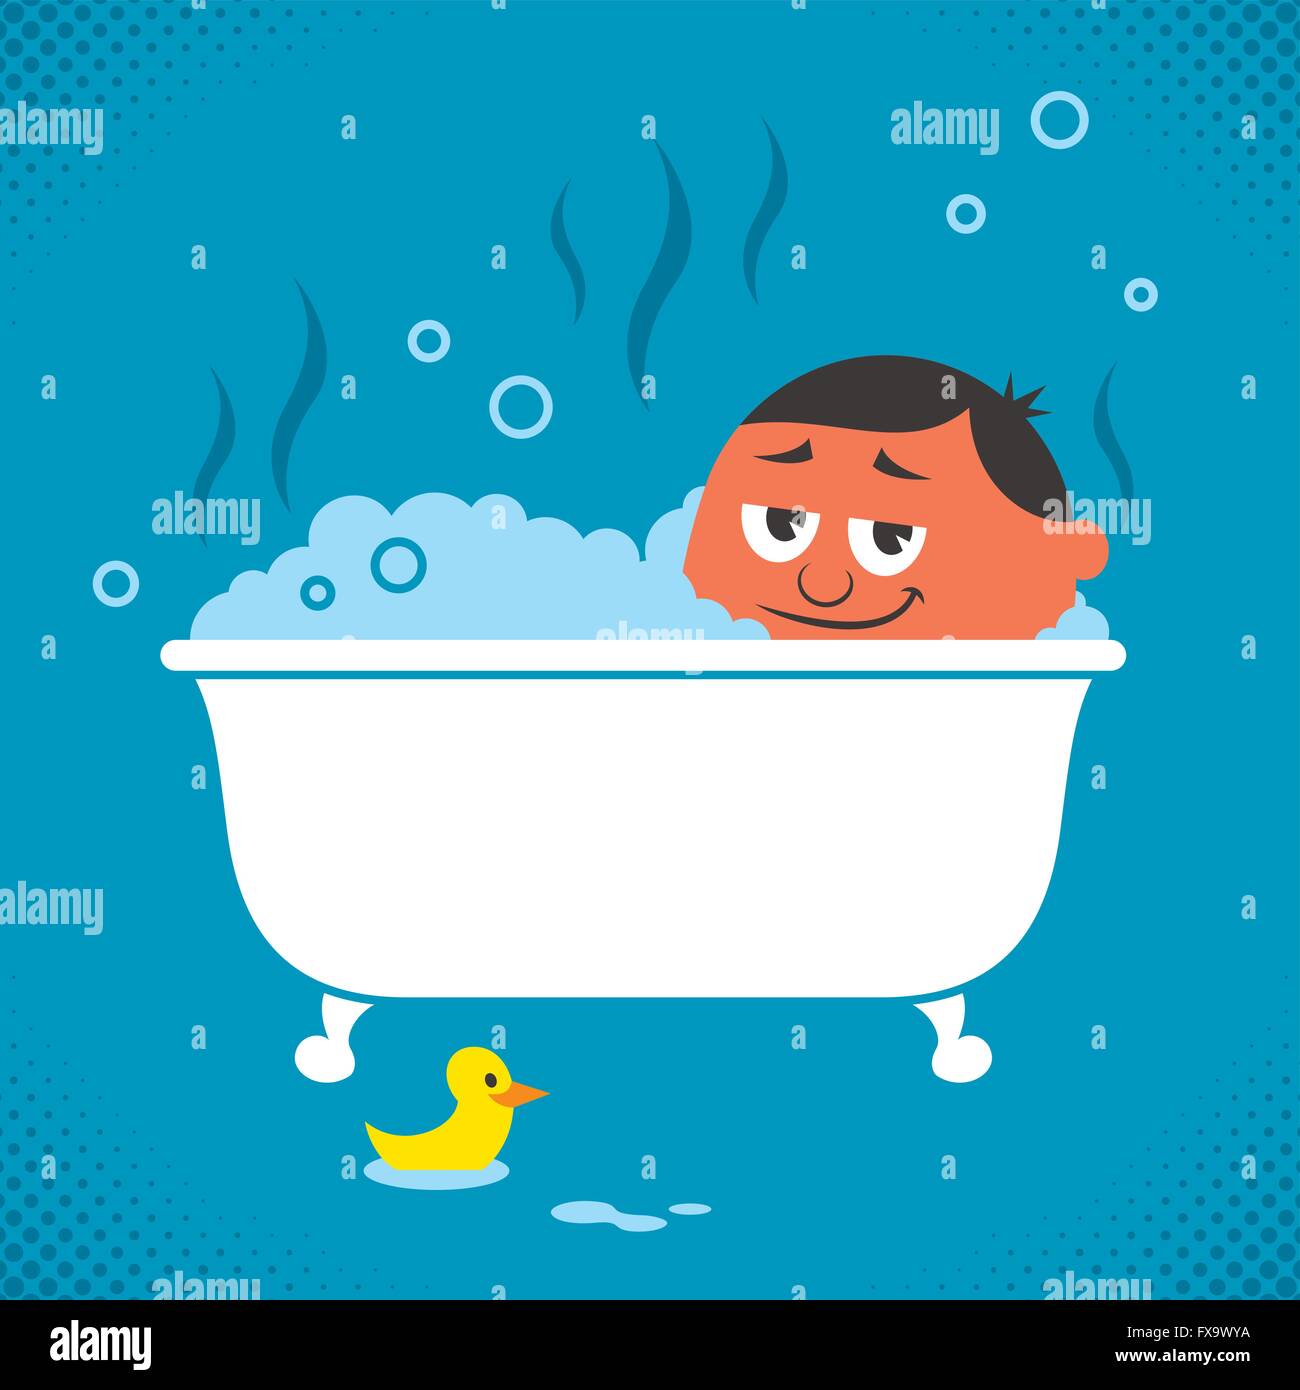 Man relaxing in bathtub. No transparency and gradients used. Stock Vector